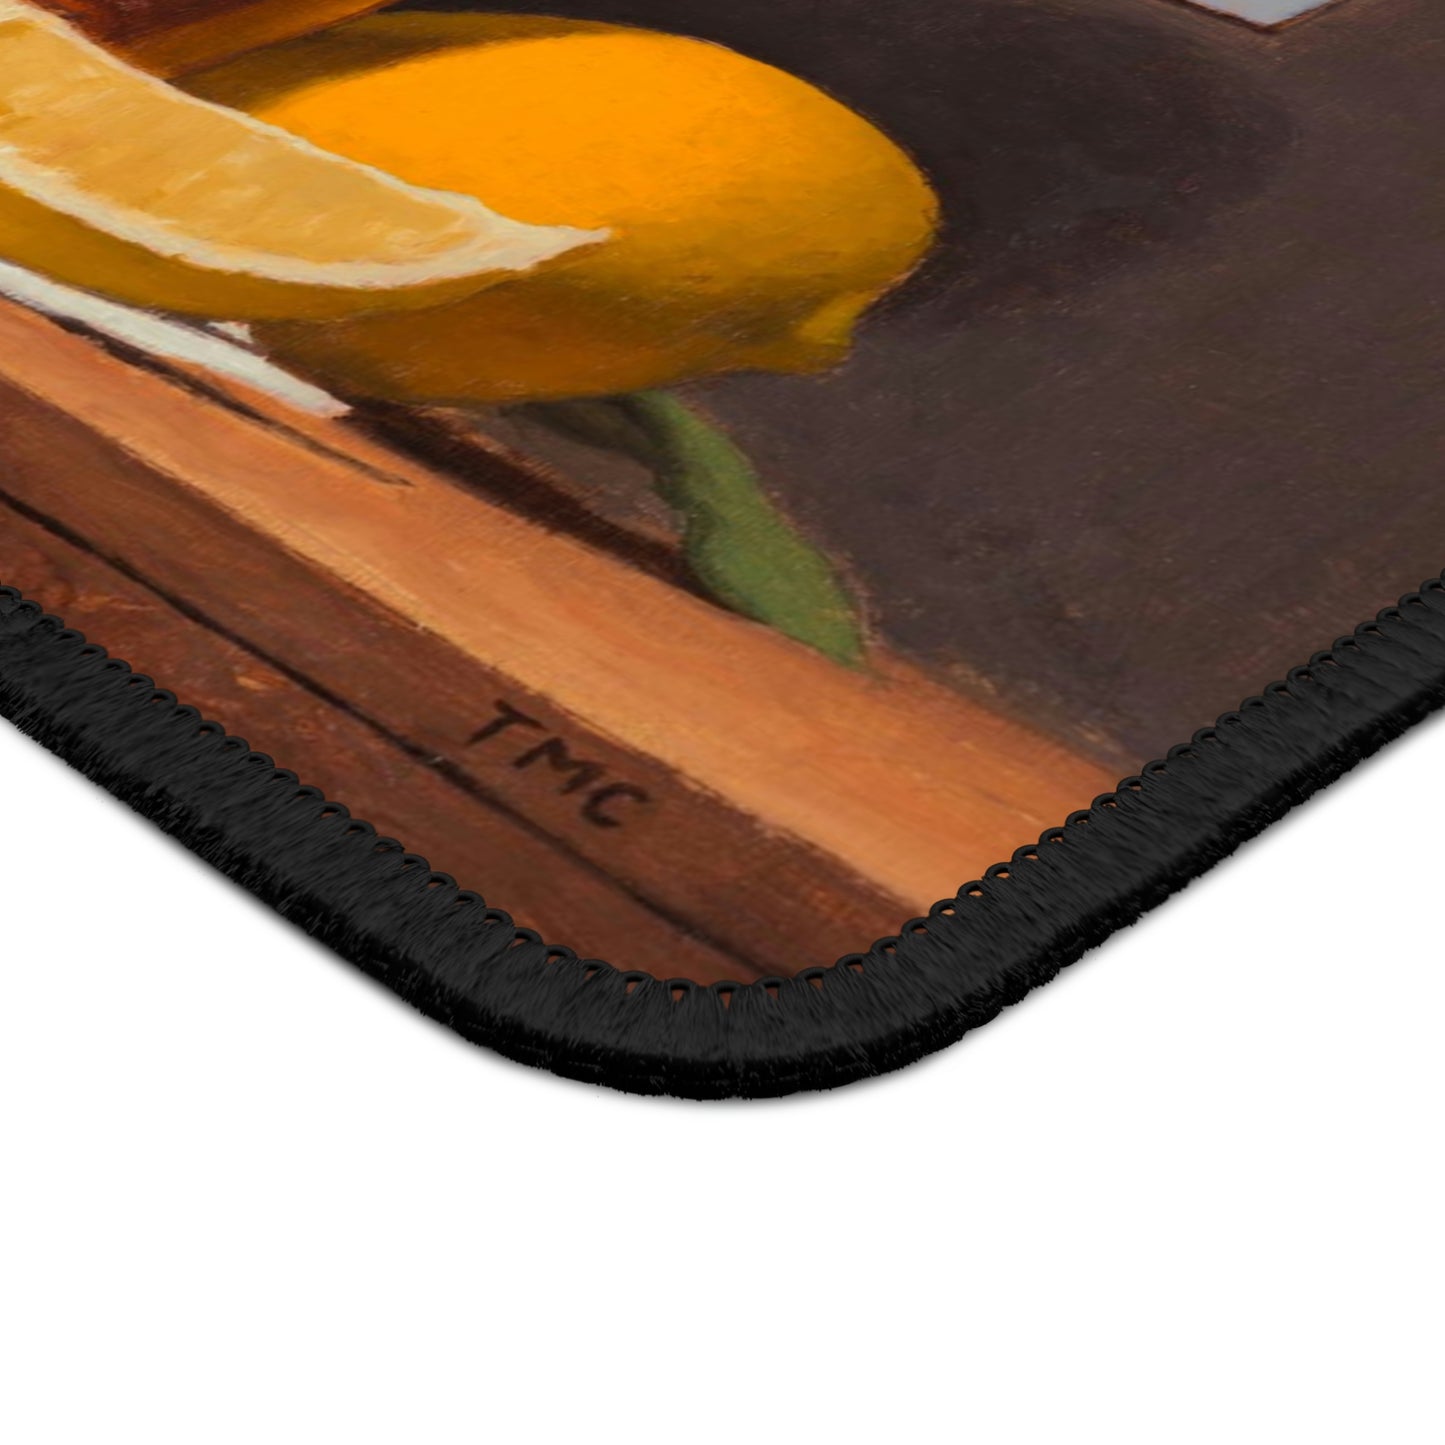 Todd Casey: "Long Island Iced Tea" - Gaming Mouse Pad